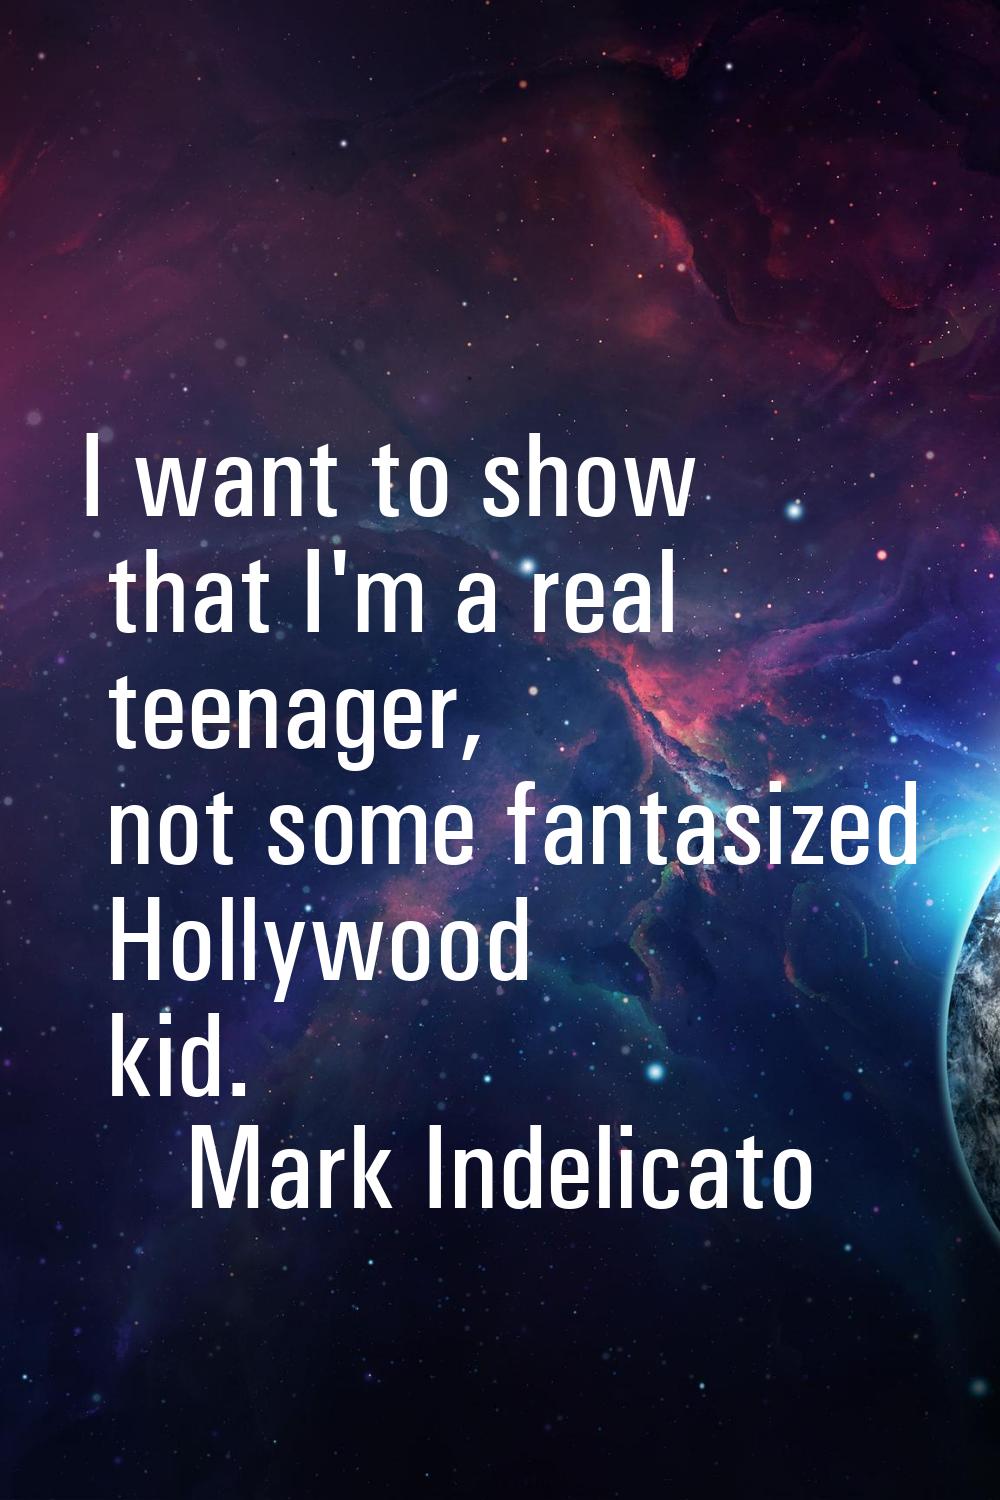 I want to show that I'm a real teenager, not some fantasized Hollywood kid.